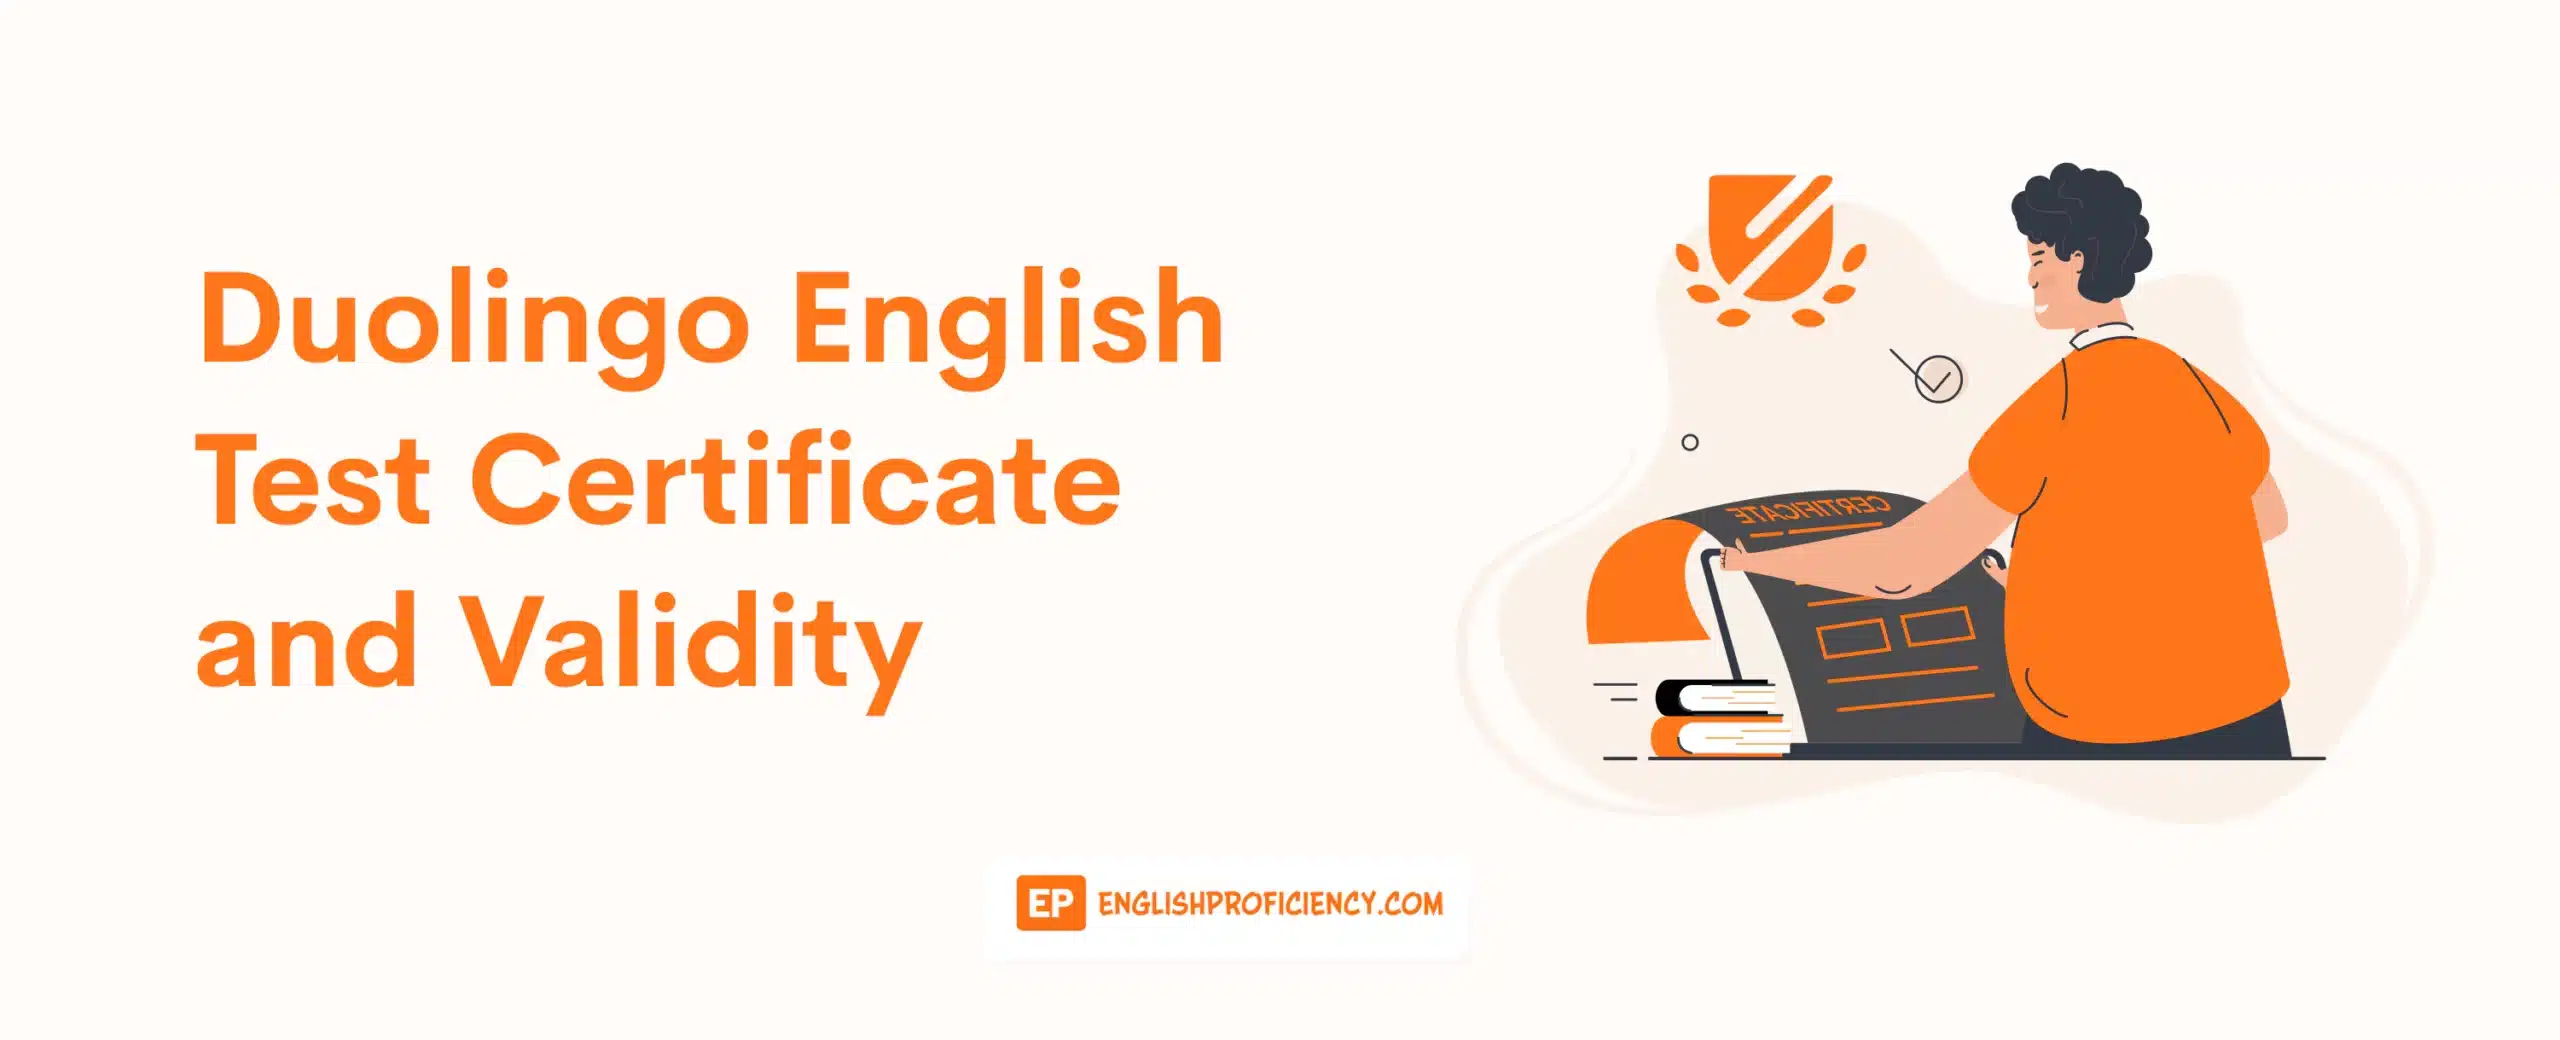 Duolingo English Test Certificate and Validity